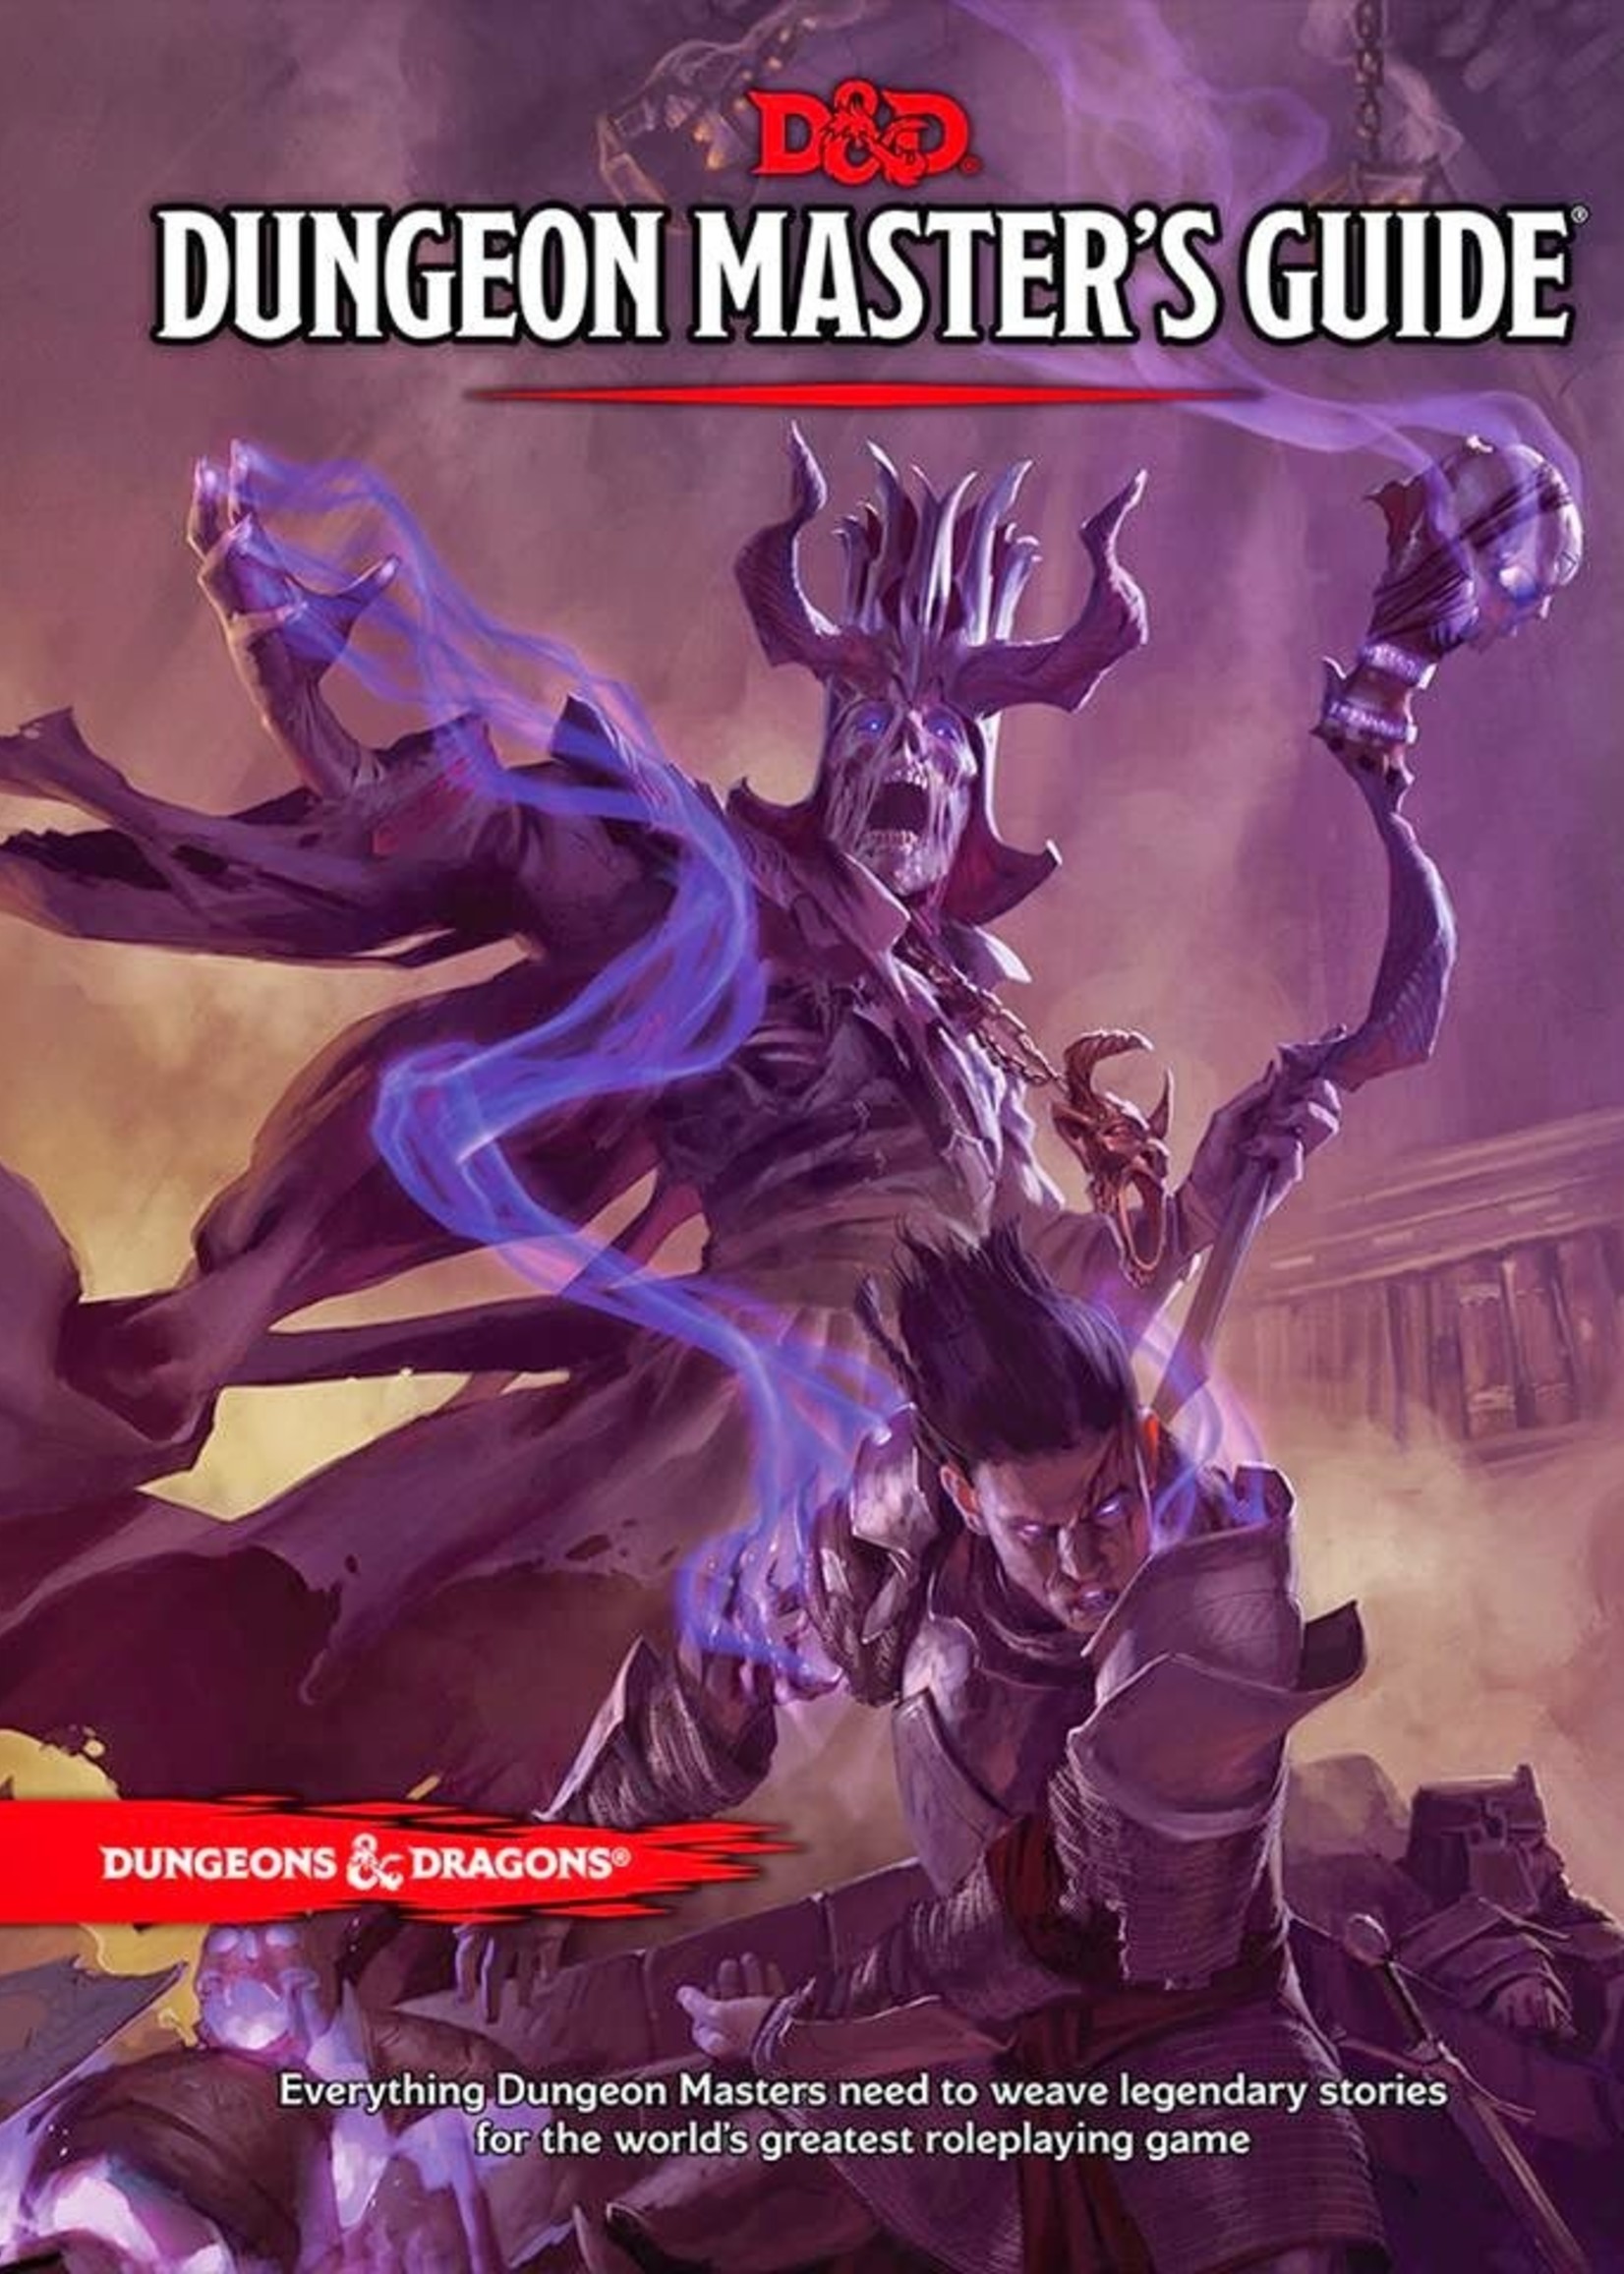 wizards-of-the-coast-dungeon-master-s-guide-het-negende-labyrint